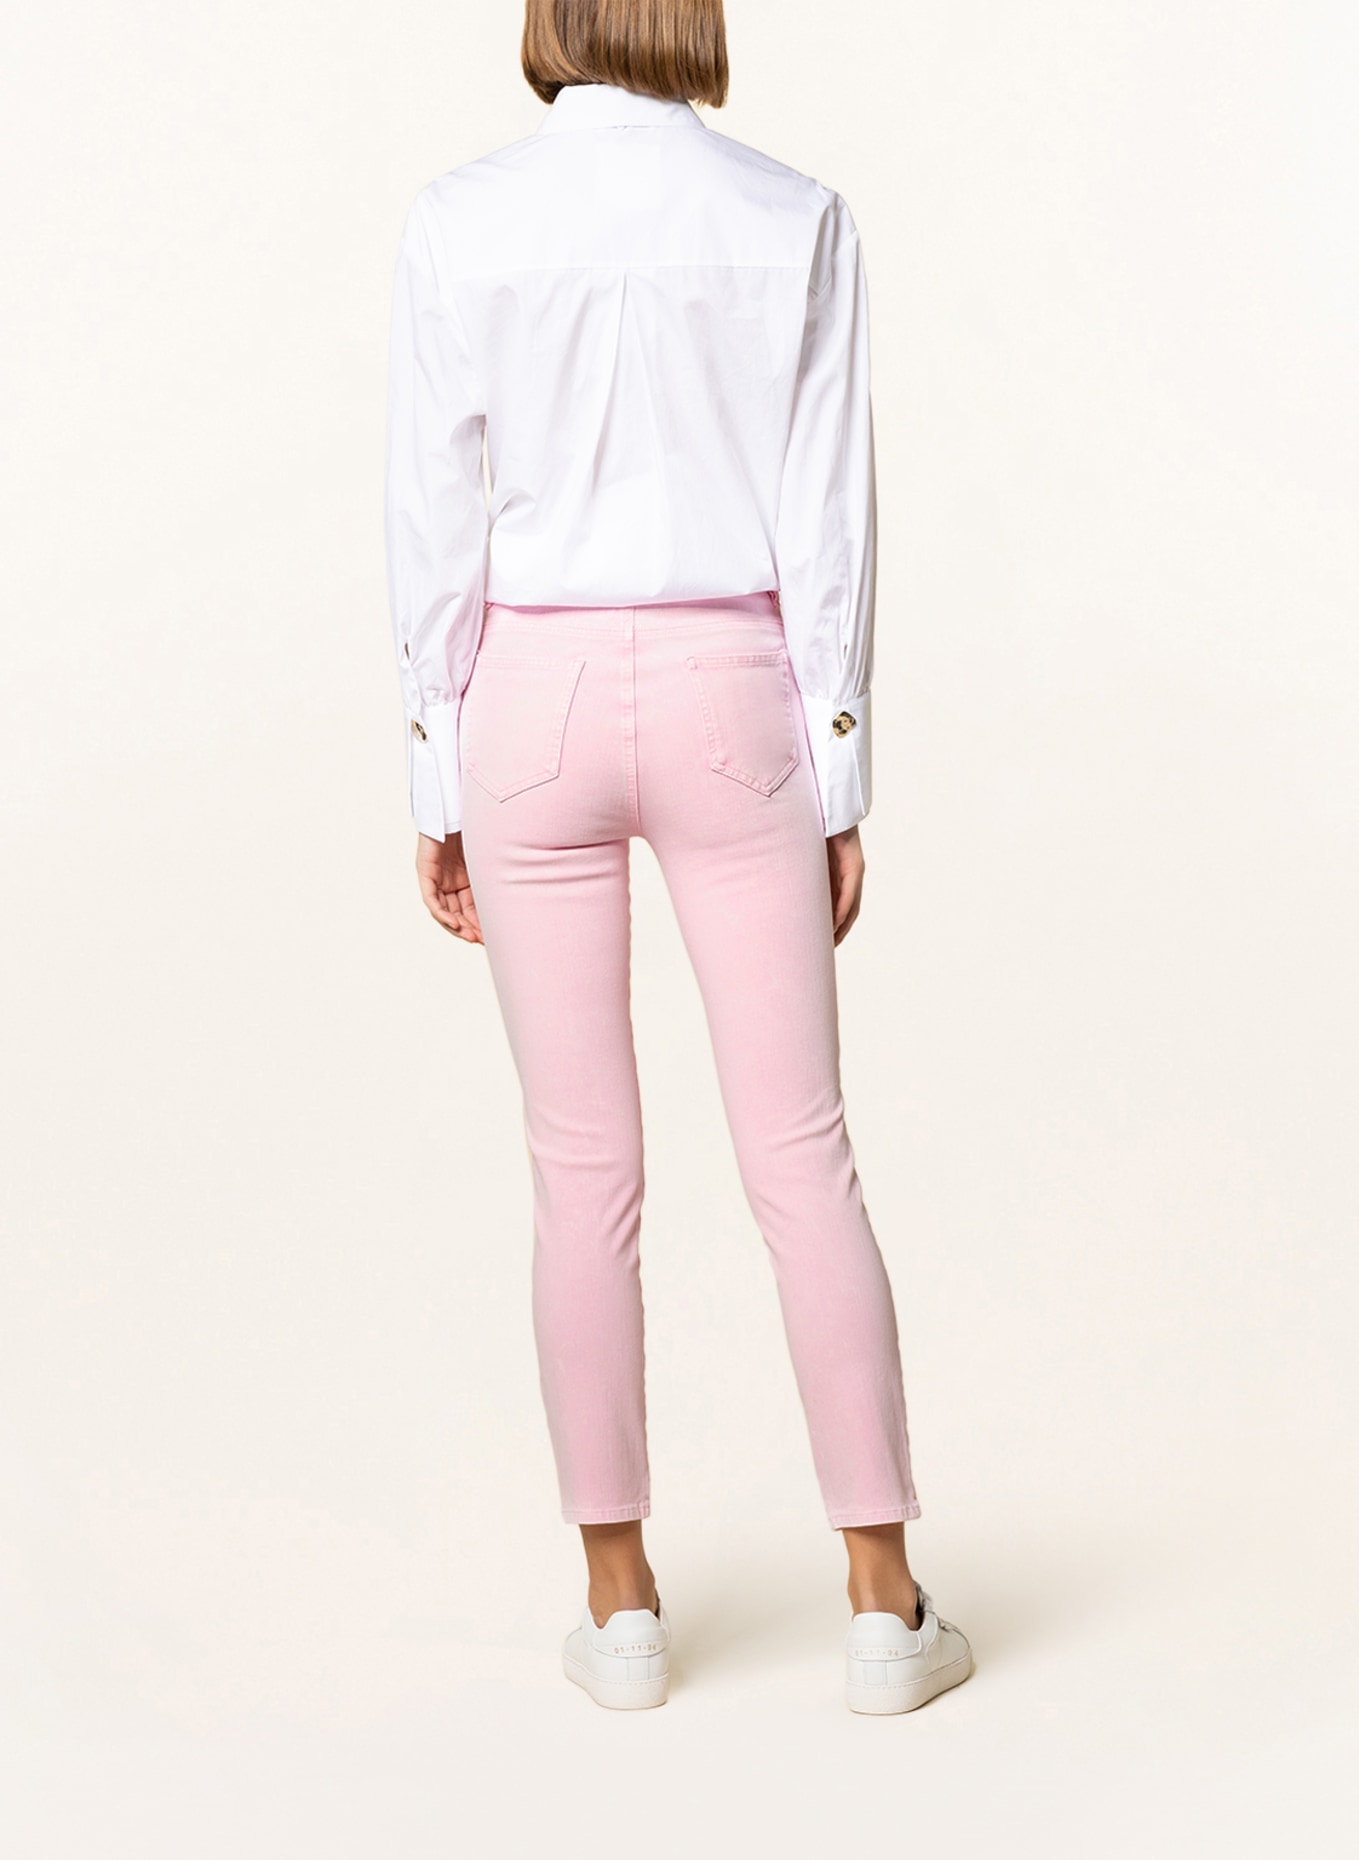 ITEM m6 Flared jeans with shaping effect, Color: 753 washed out pink (Image 3)